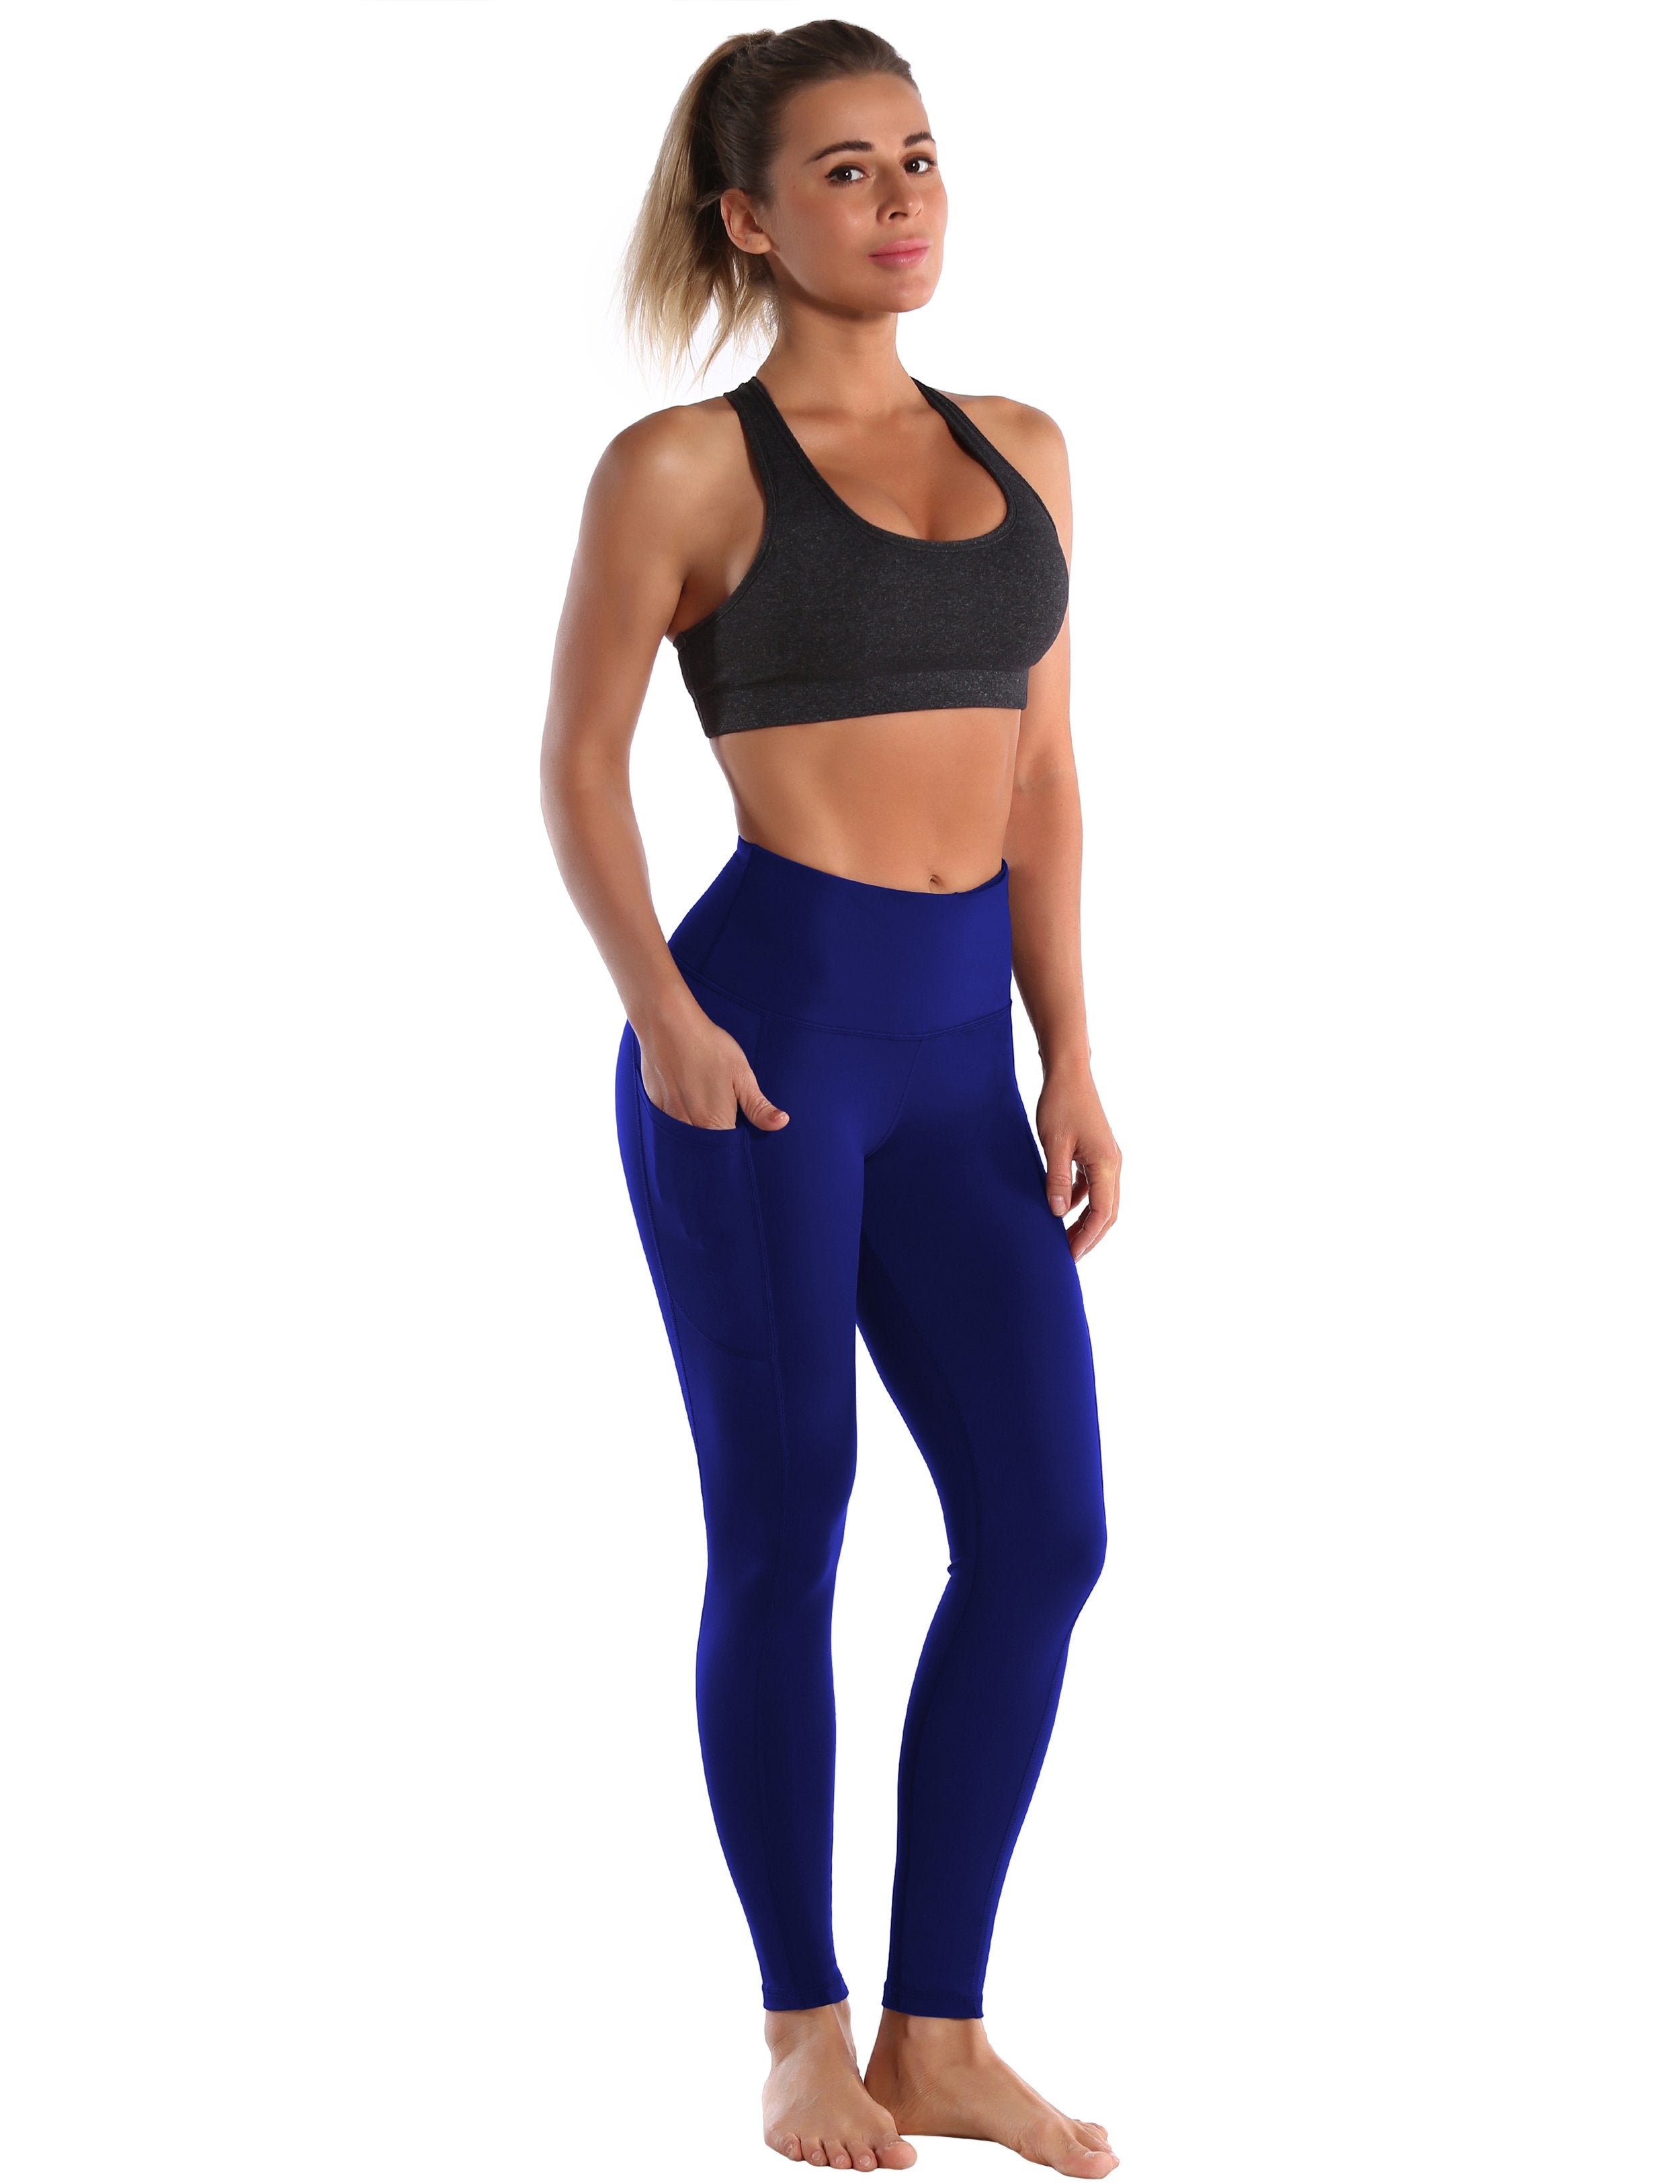 Hip Line Side Pockets Jogging Pants navy Sexy Hip Line Side Pockets 75%Nylon/25%Spandex Fabric doesn't attract lint easily 4-way stretch No see-through Moisture-wicking Tummy control Inner pocket Two lengths